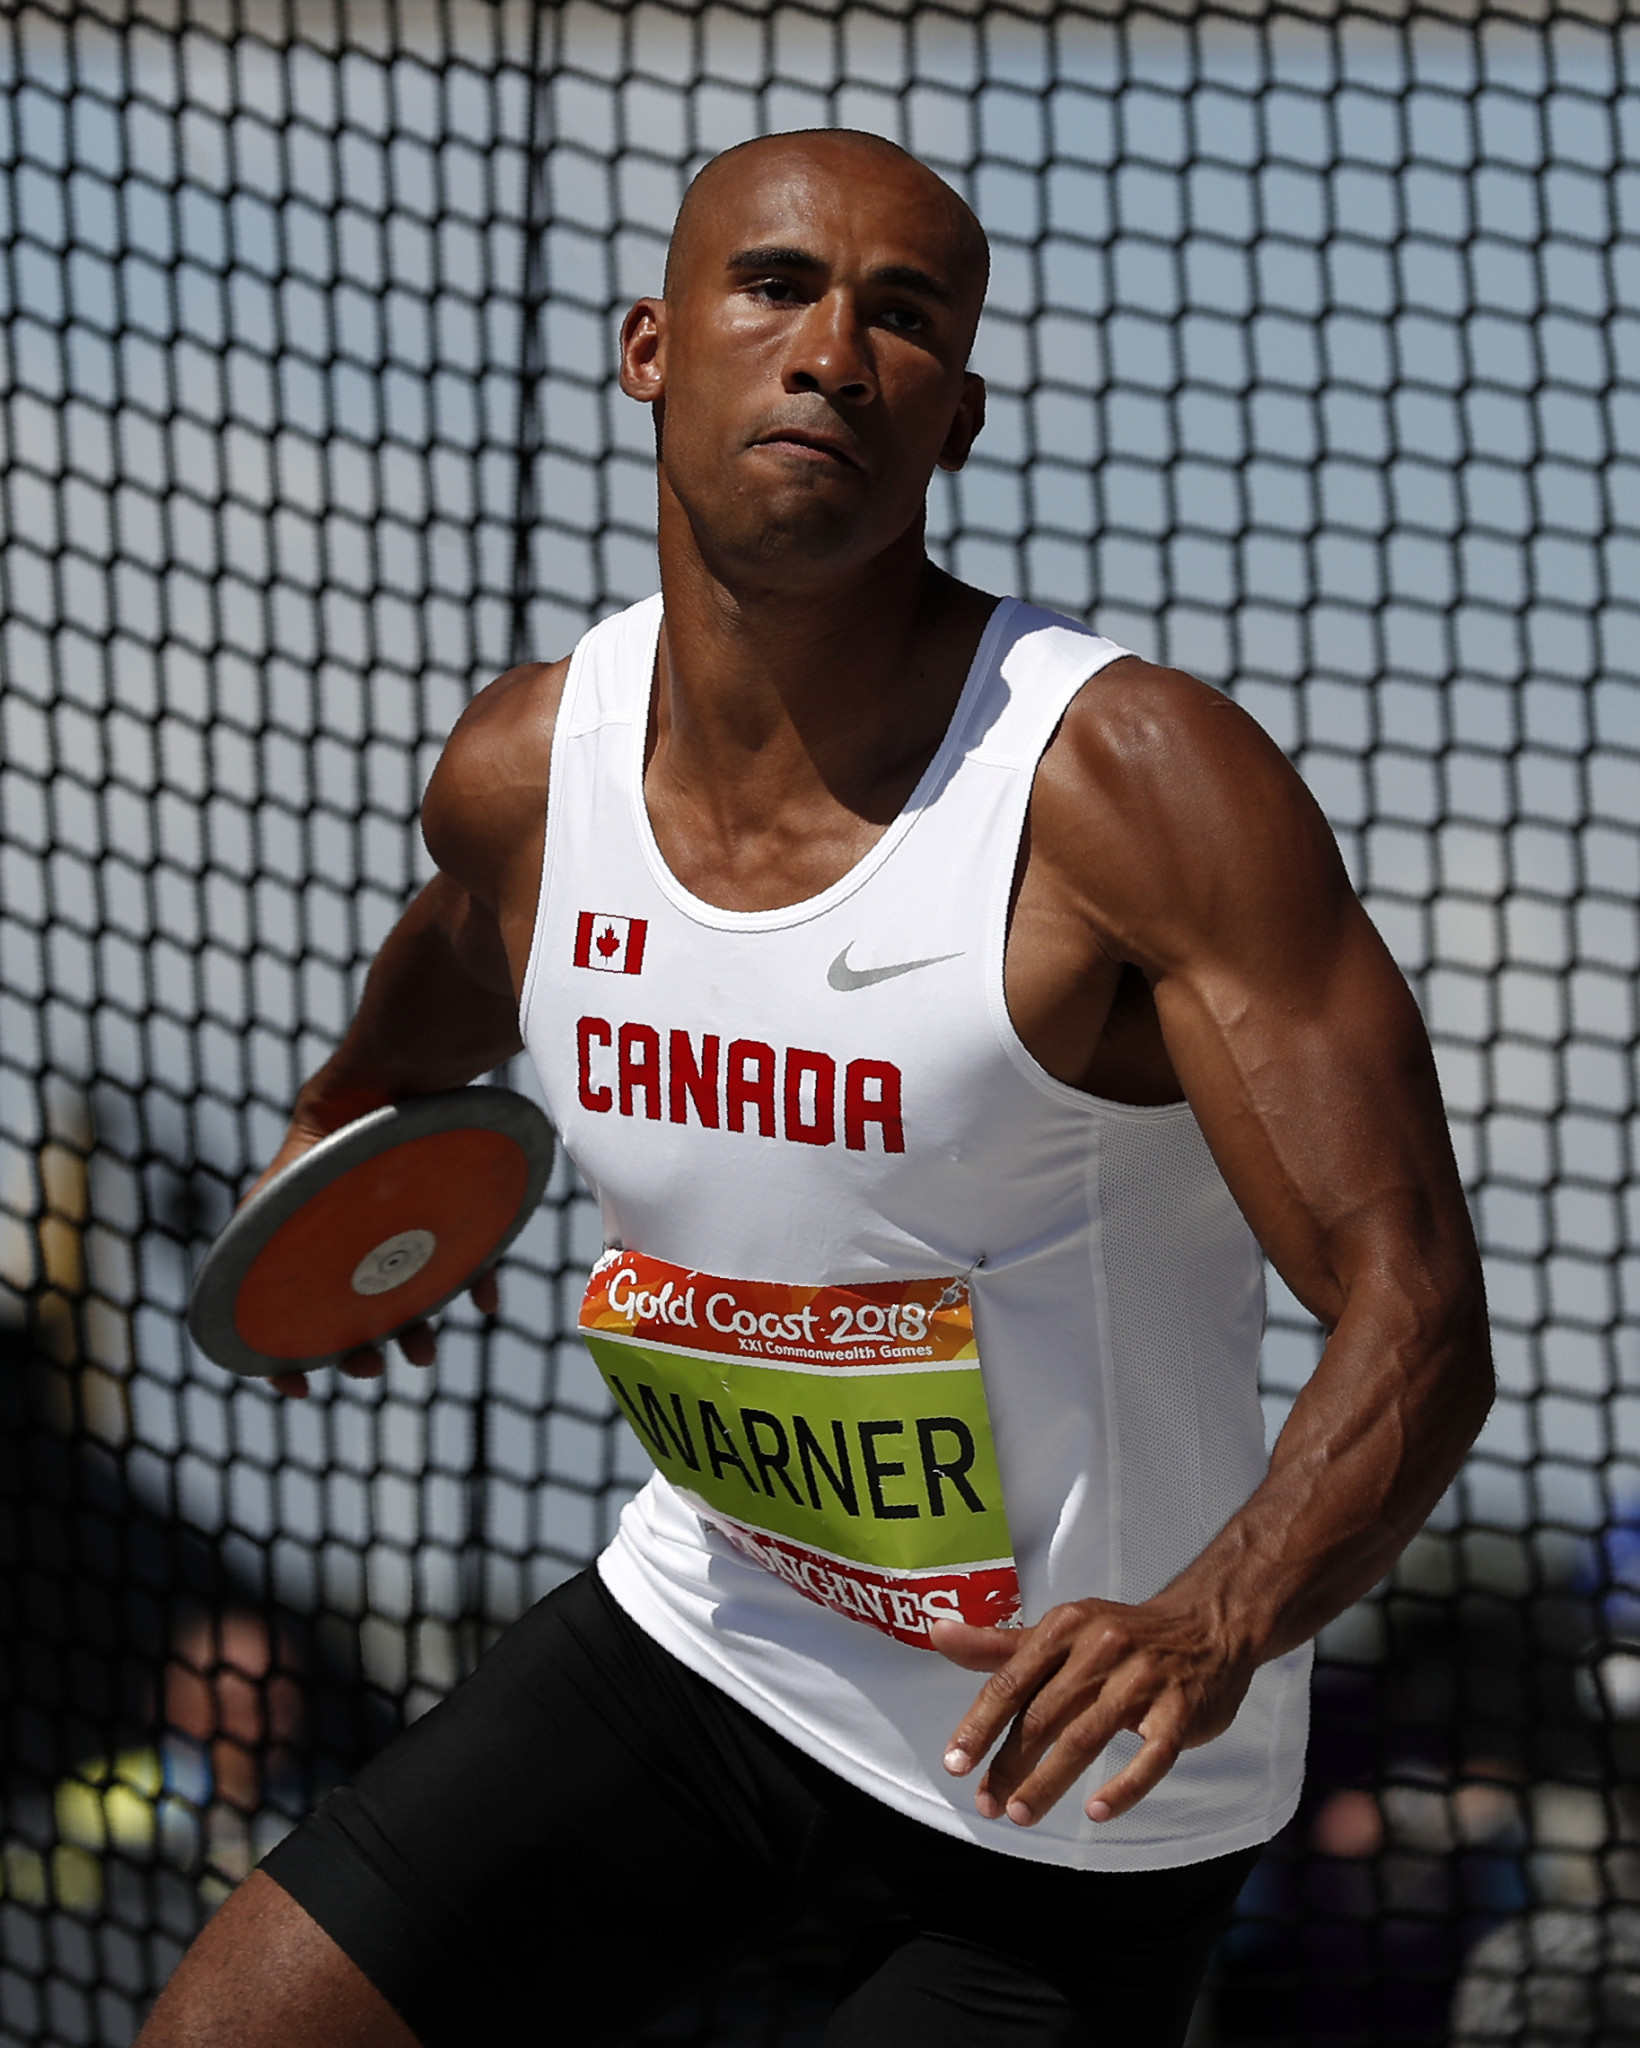 Canada's Damian Warner will seek a record-equalling fifth win at the IAAF Combined Events Challenge meeting in Götzis this weekend ©Getty Images